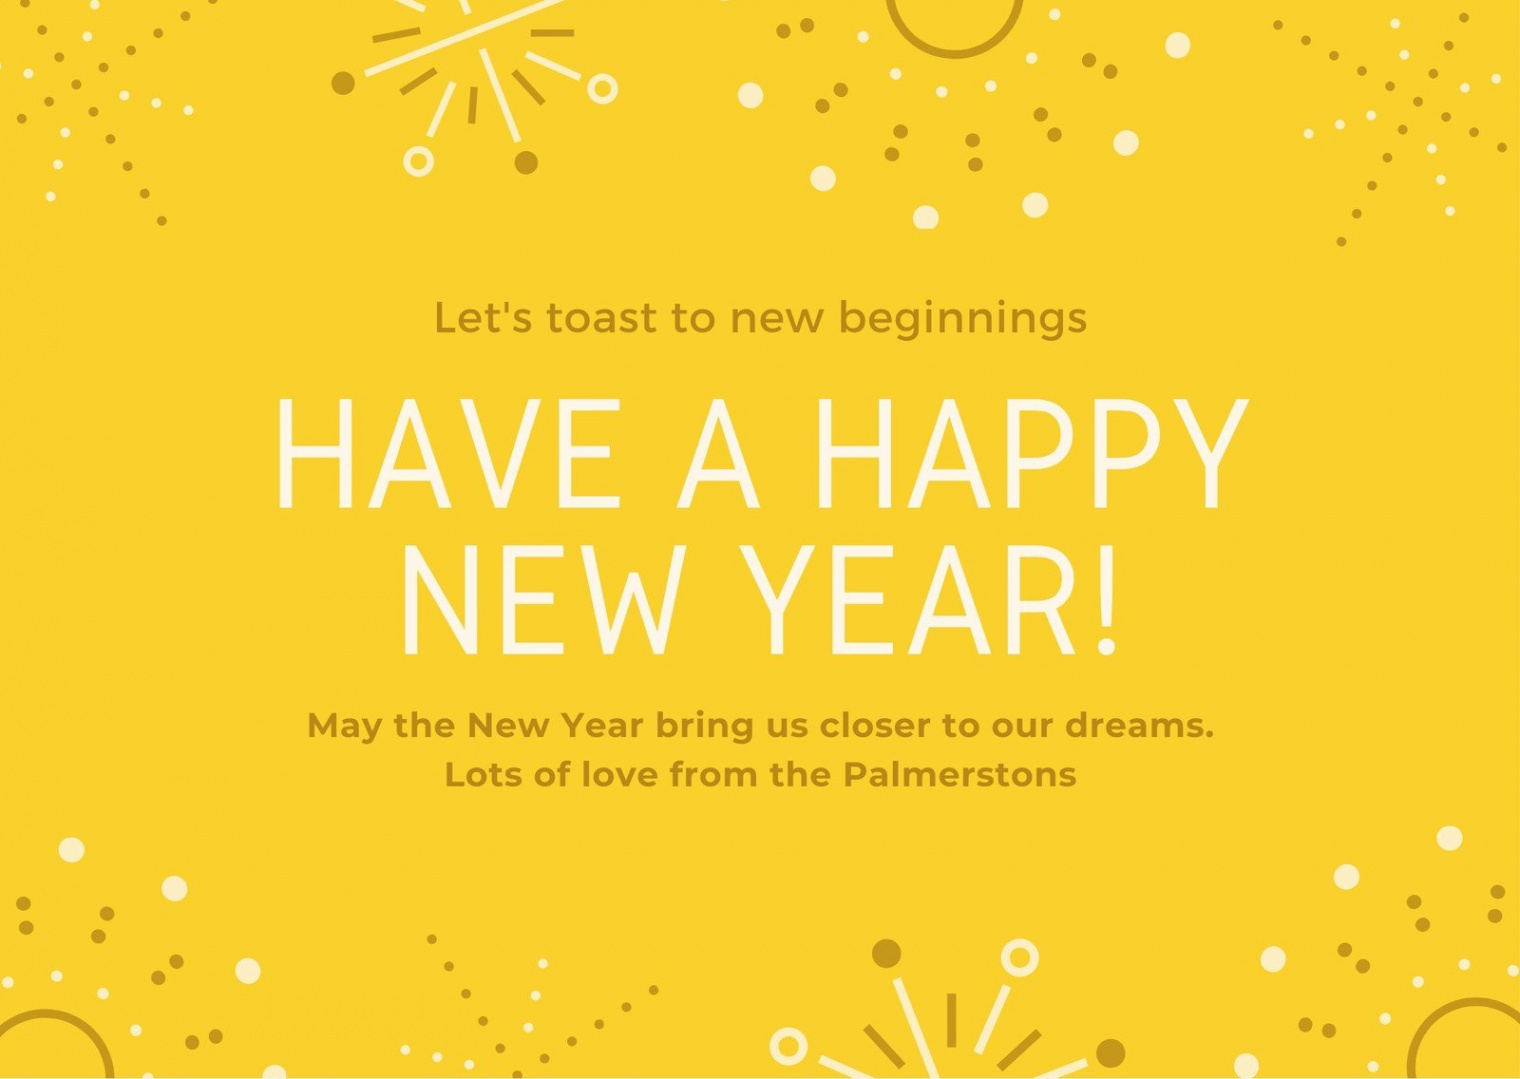 Sparkly New Year Greeting Card - Templates by Canva